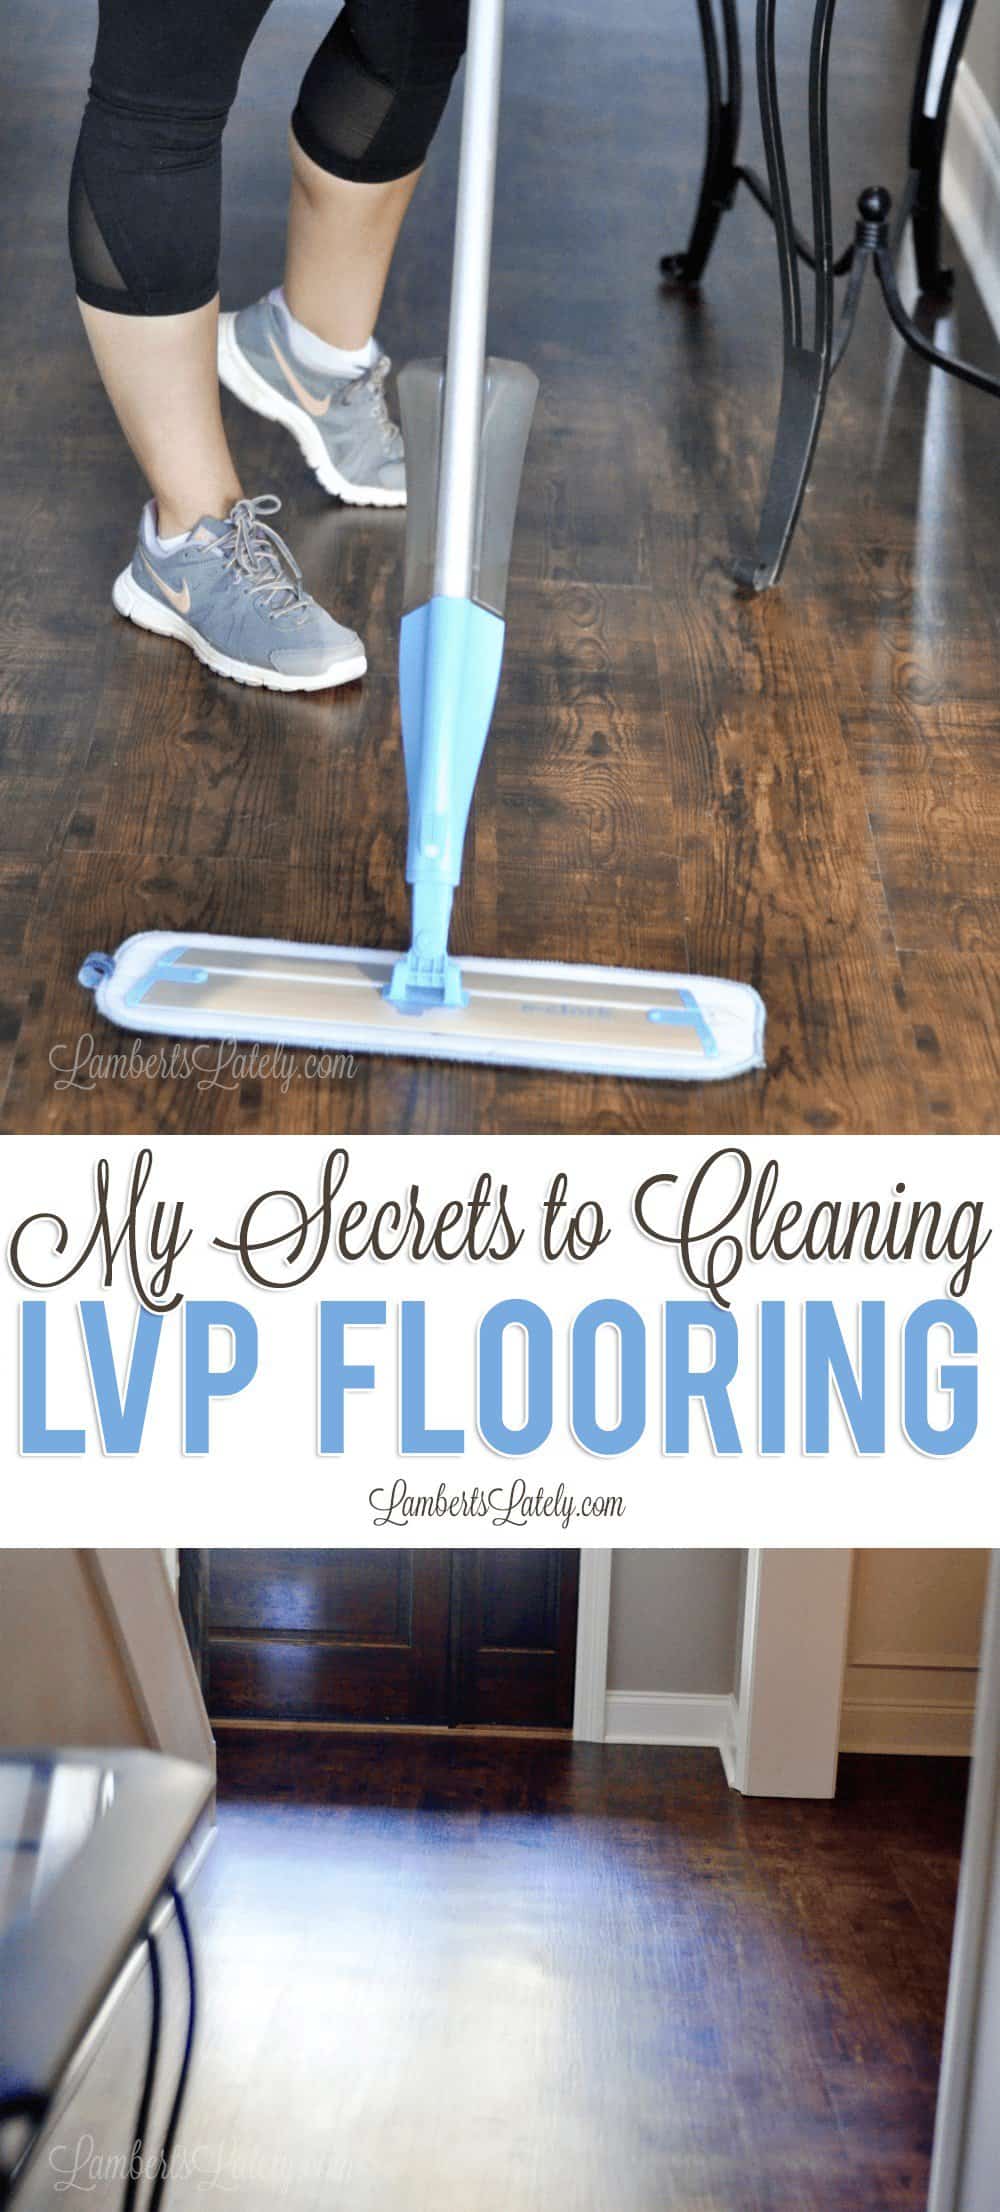 Great tips for how to clean Luxury Vinyl Plank Flooring (LVP) - has mop, robot vacuum, and floor cleaner recommendations! These cleaning ideas include the best way to keep up daily and weekly maintenance.